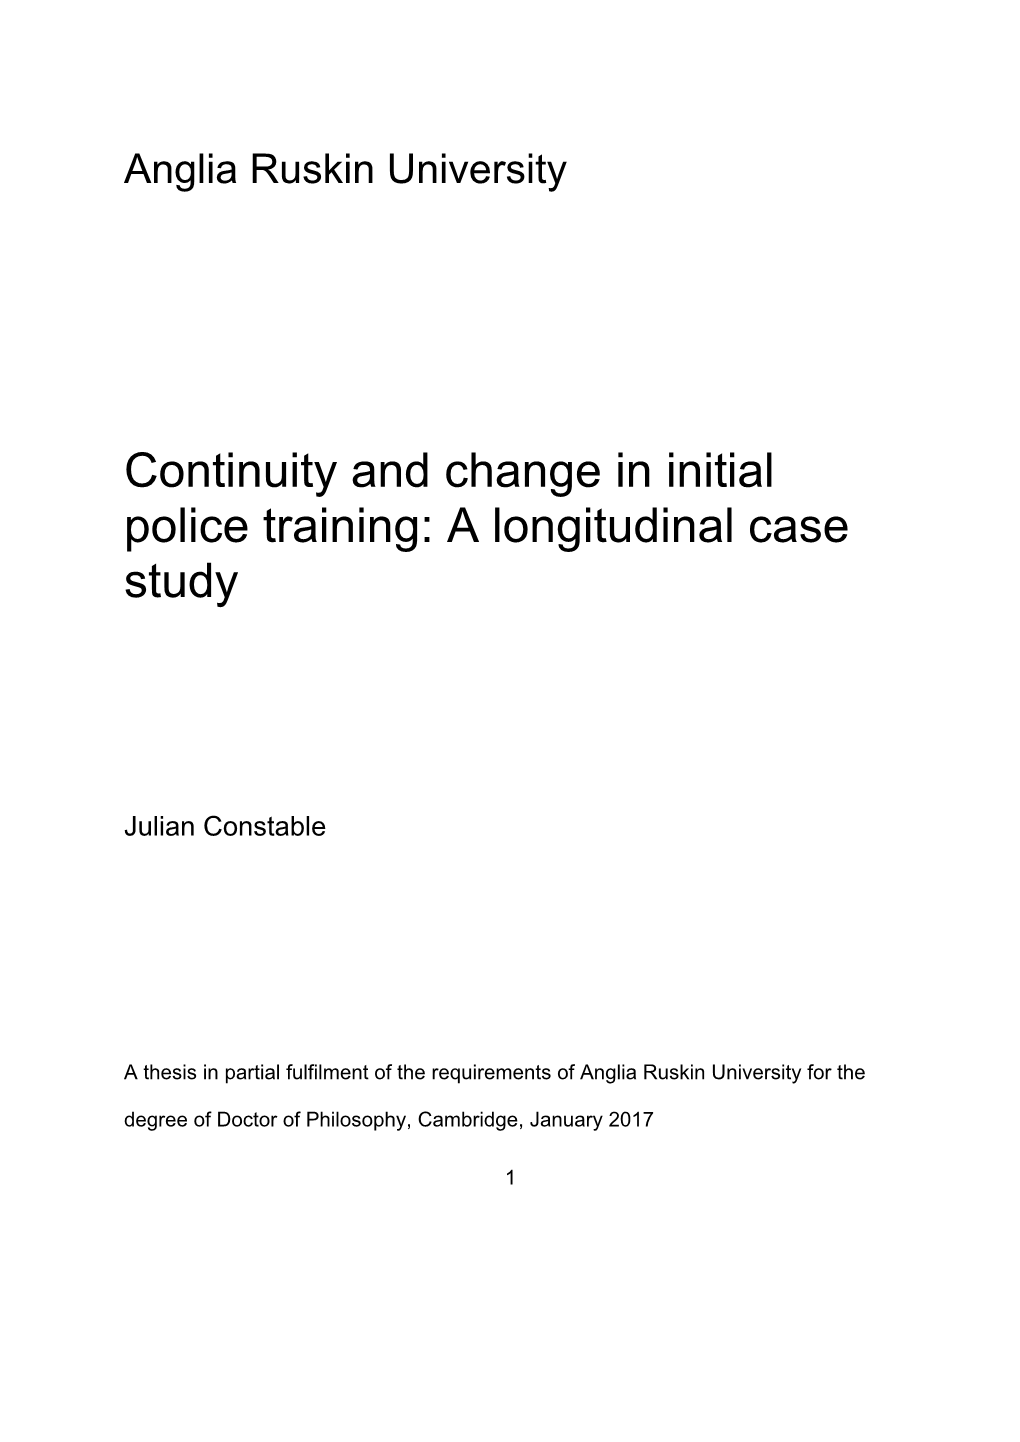 Continuity and Change in Initial Police Training: a Longitudinal Case Study